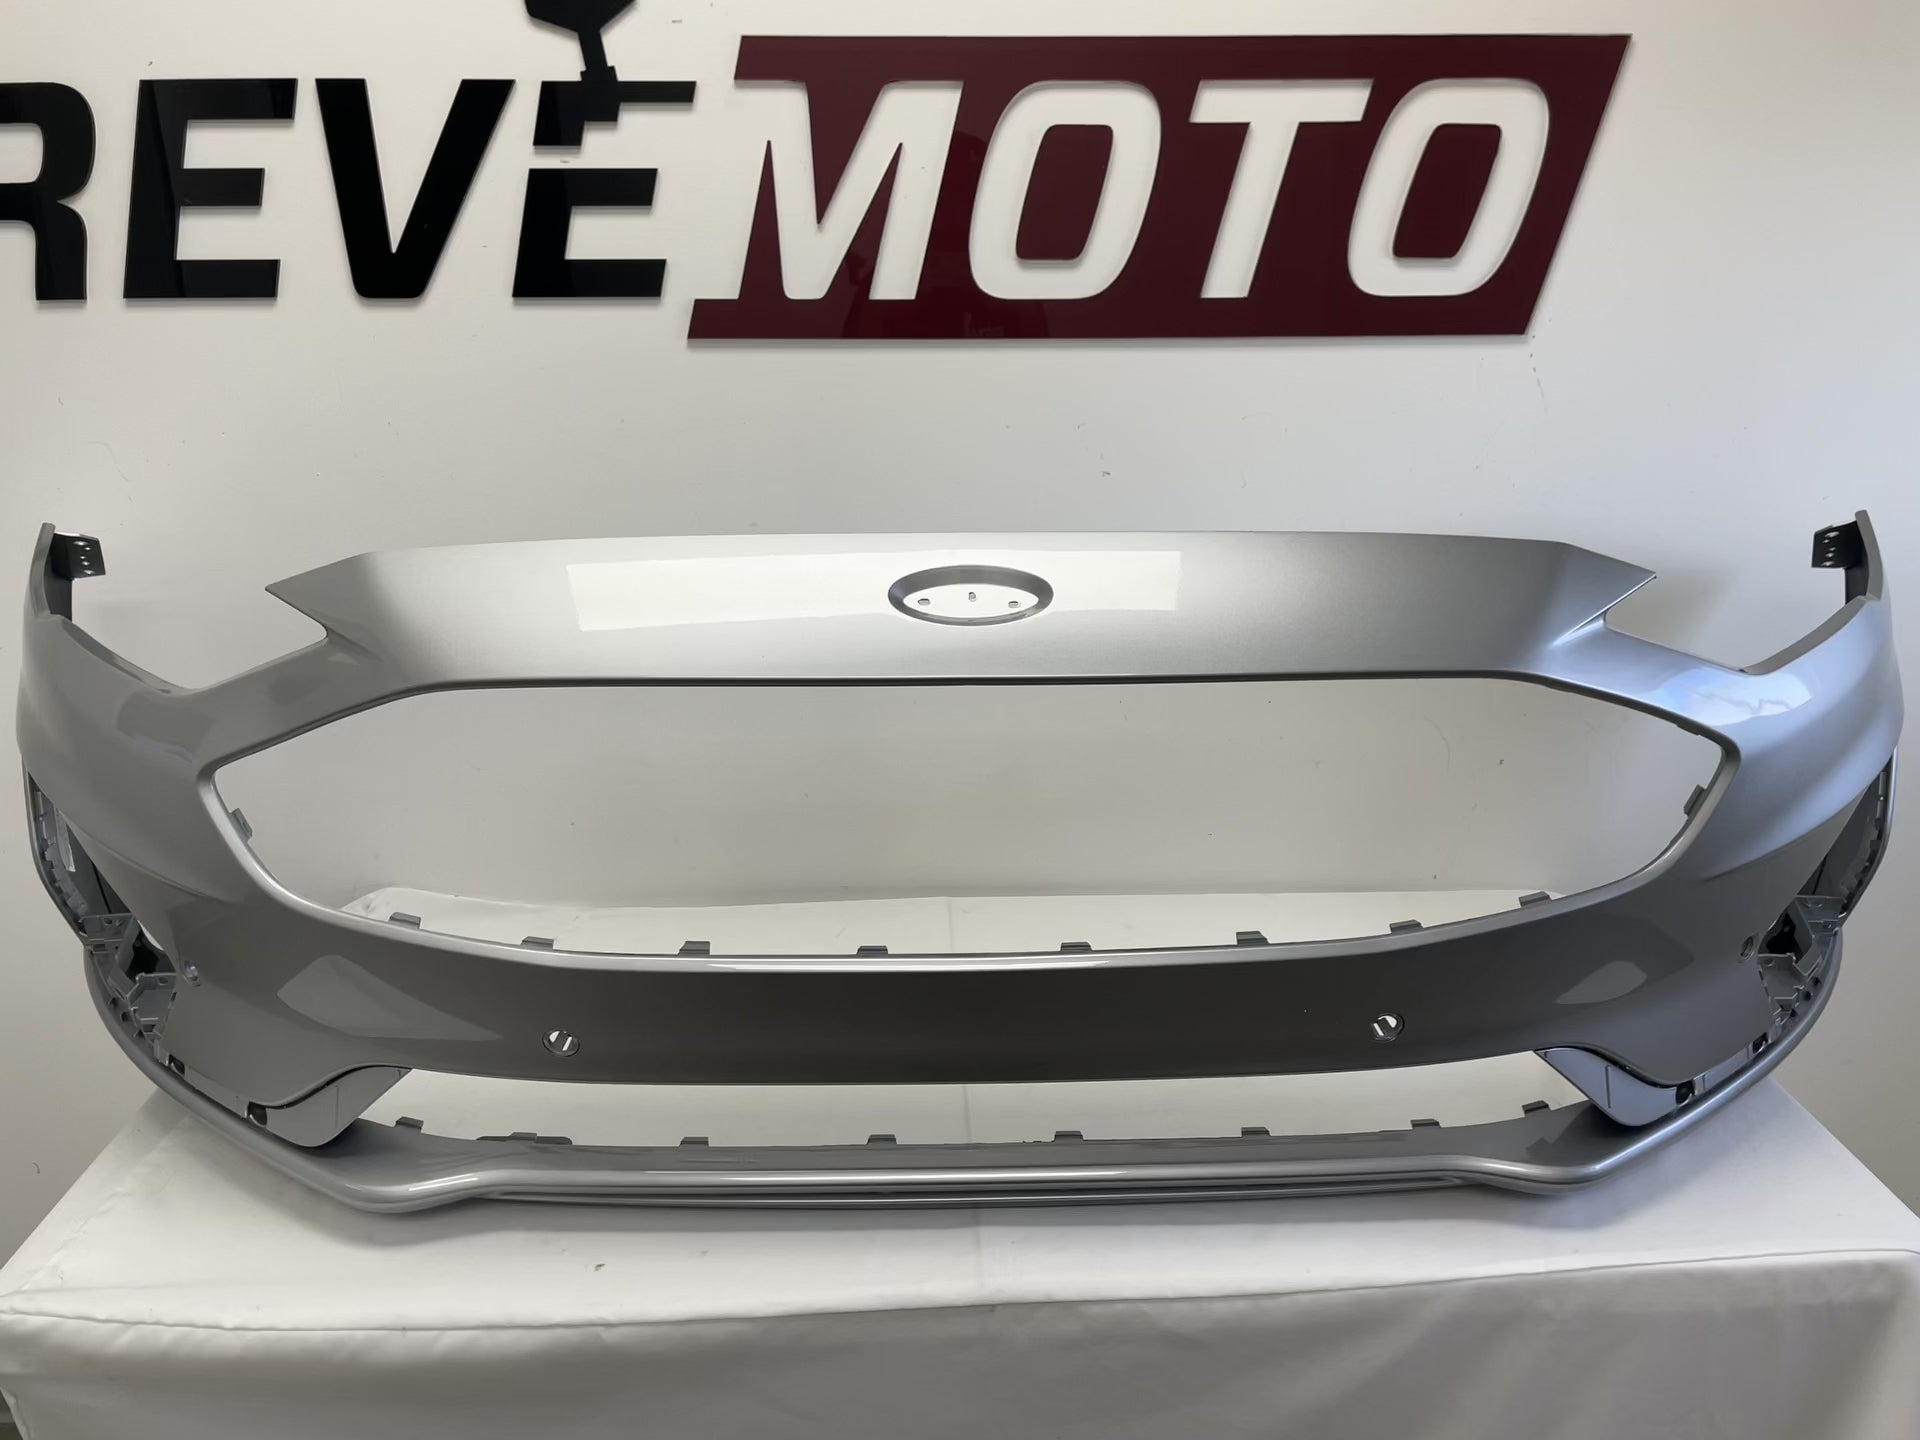 25332 - 2019-2020 Ford Fusion Front Bumper Painted (wo Tow Hook Holes) Iconic Silver Metallic (JS) KS7Z17D957SAPTM FO1000758